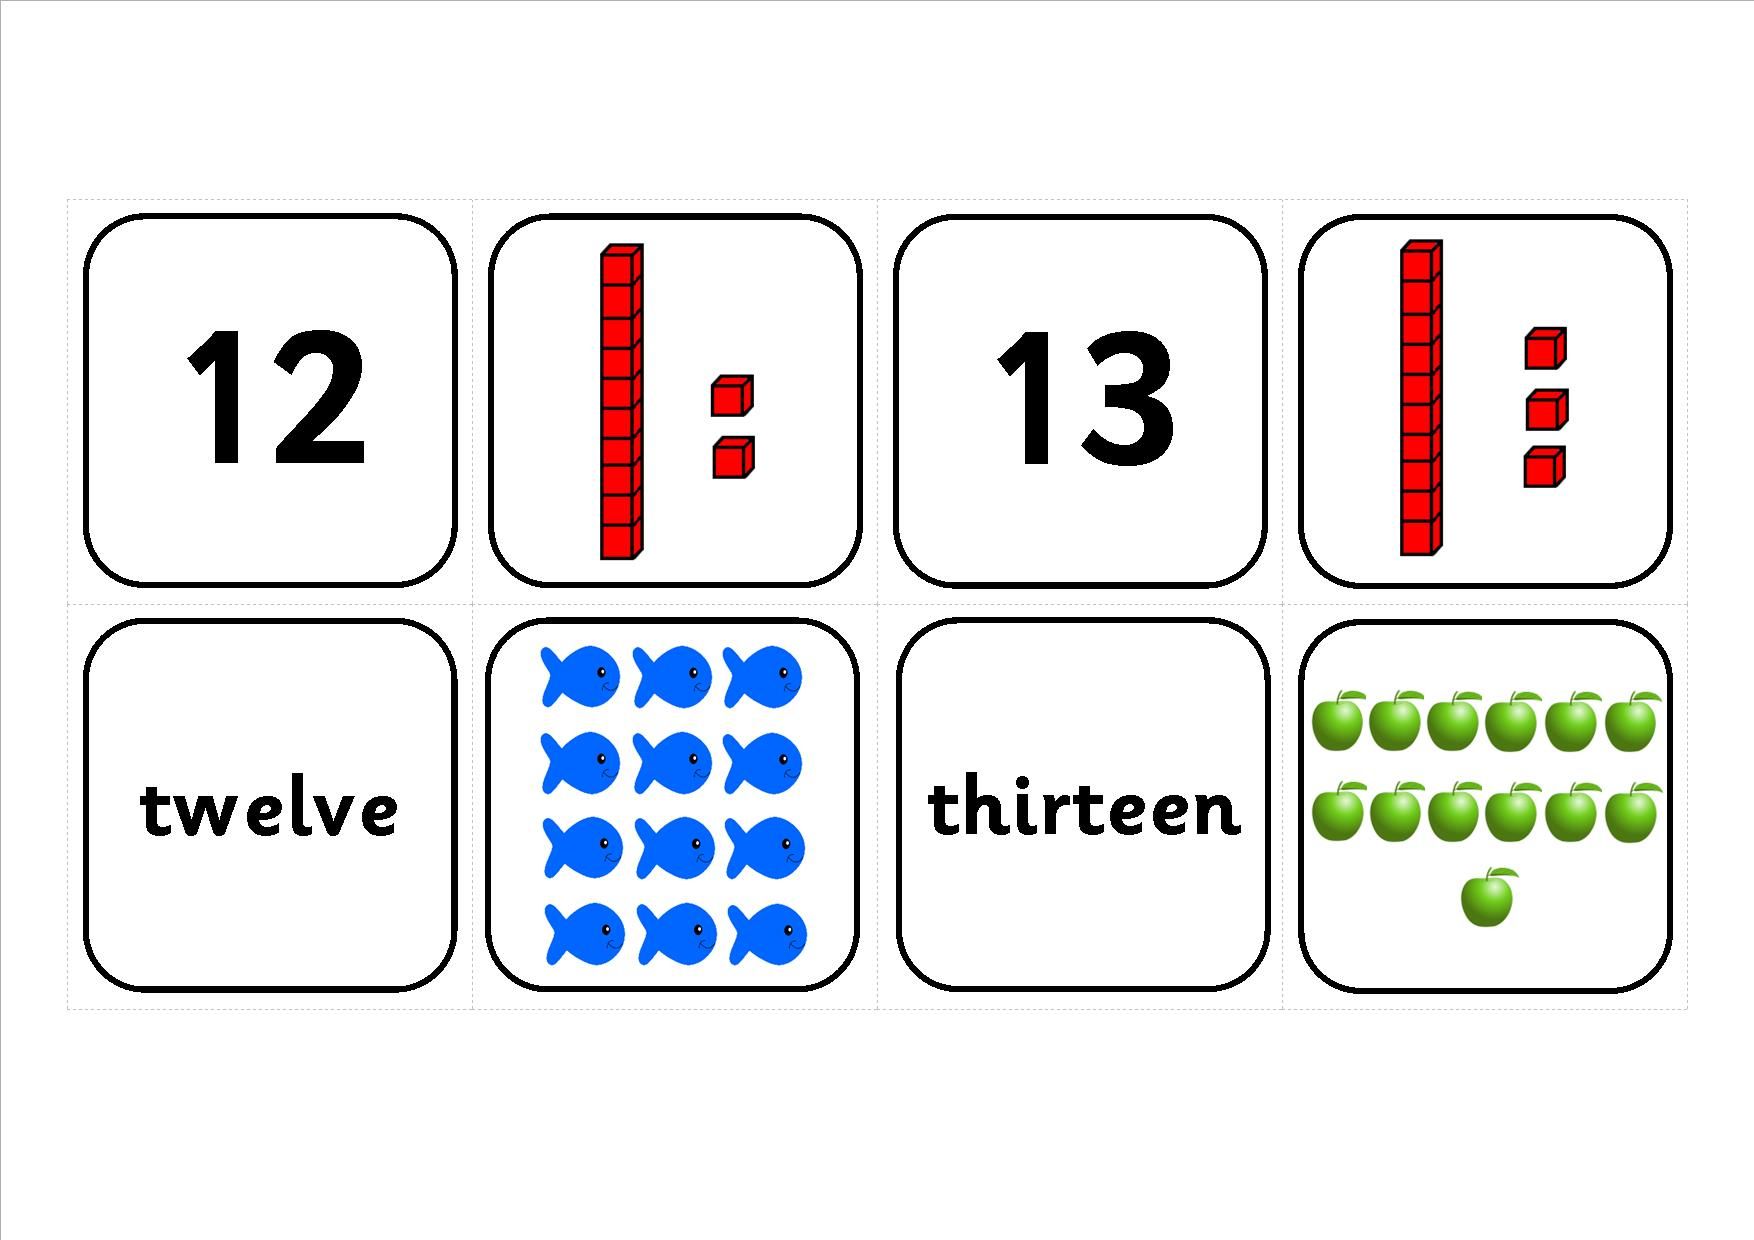 eyfs-ks1-sen-year-1-representing-numbers-in-different-ways-happy-number-families-game